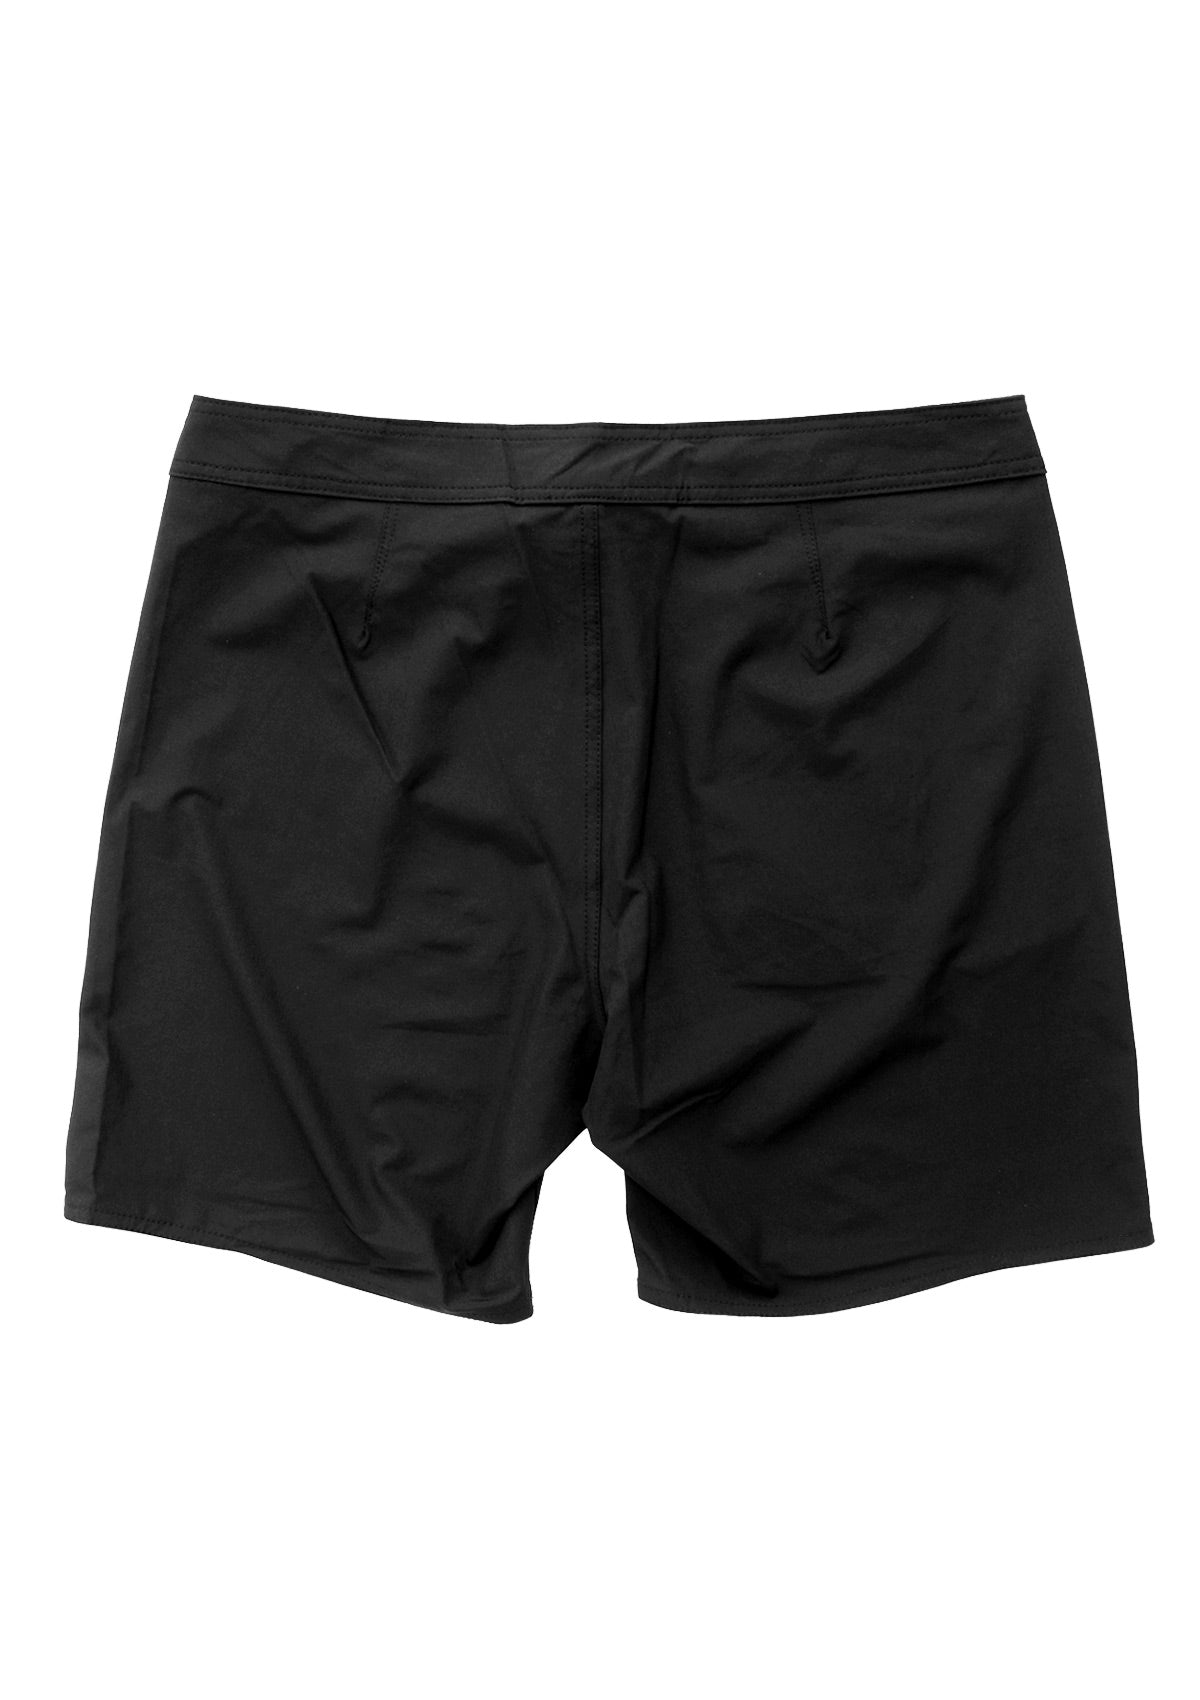 needessentials side mens surfing boardshorts non branded black swimming